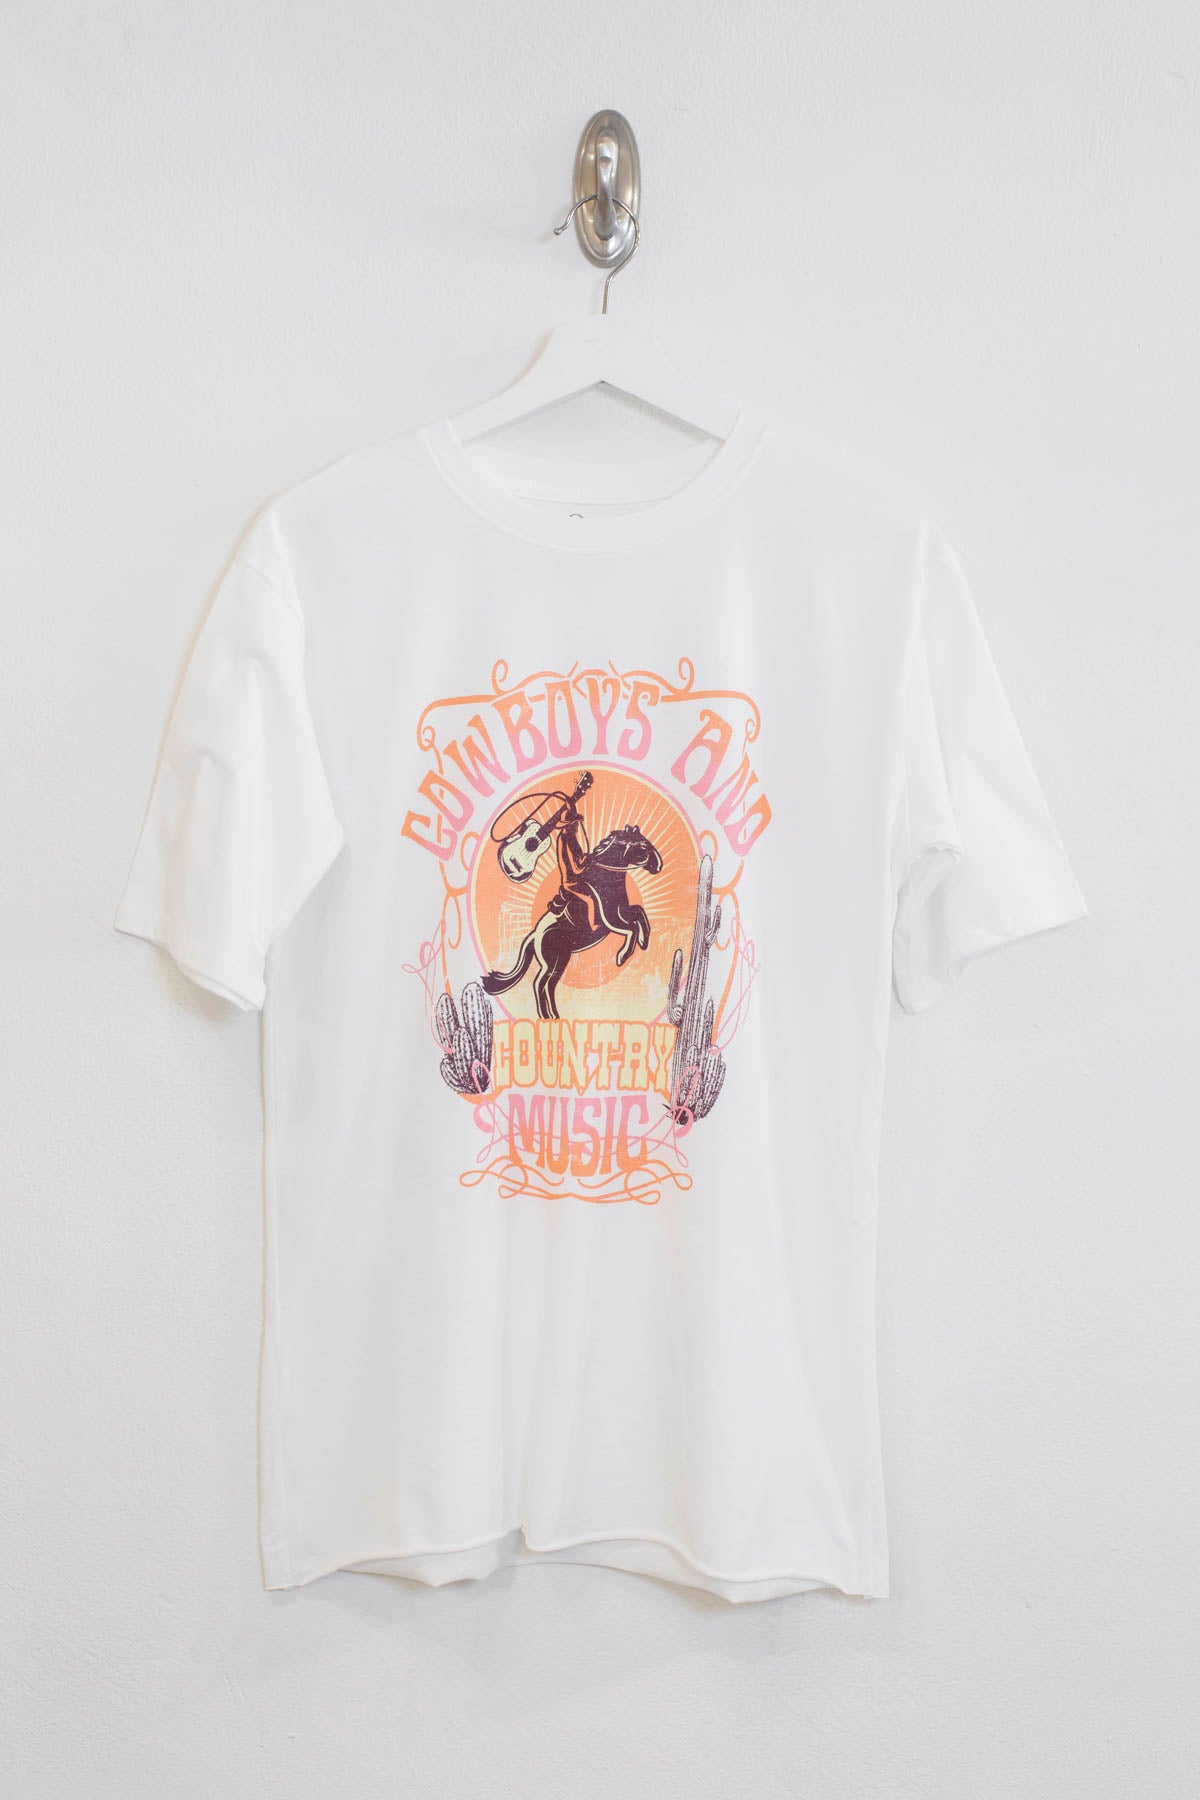 Cowboy & Country Music Graphic Tee - OG